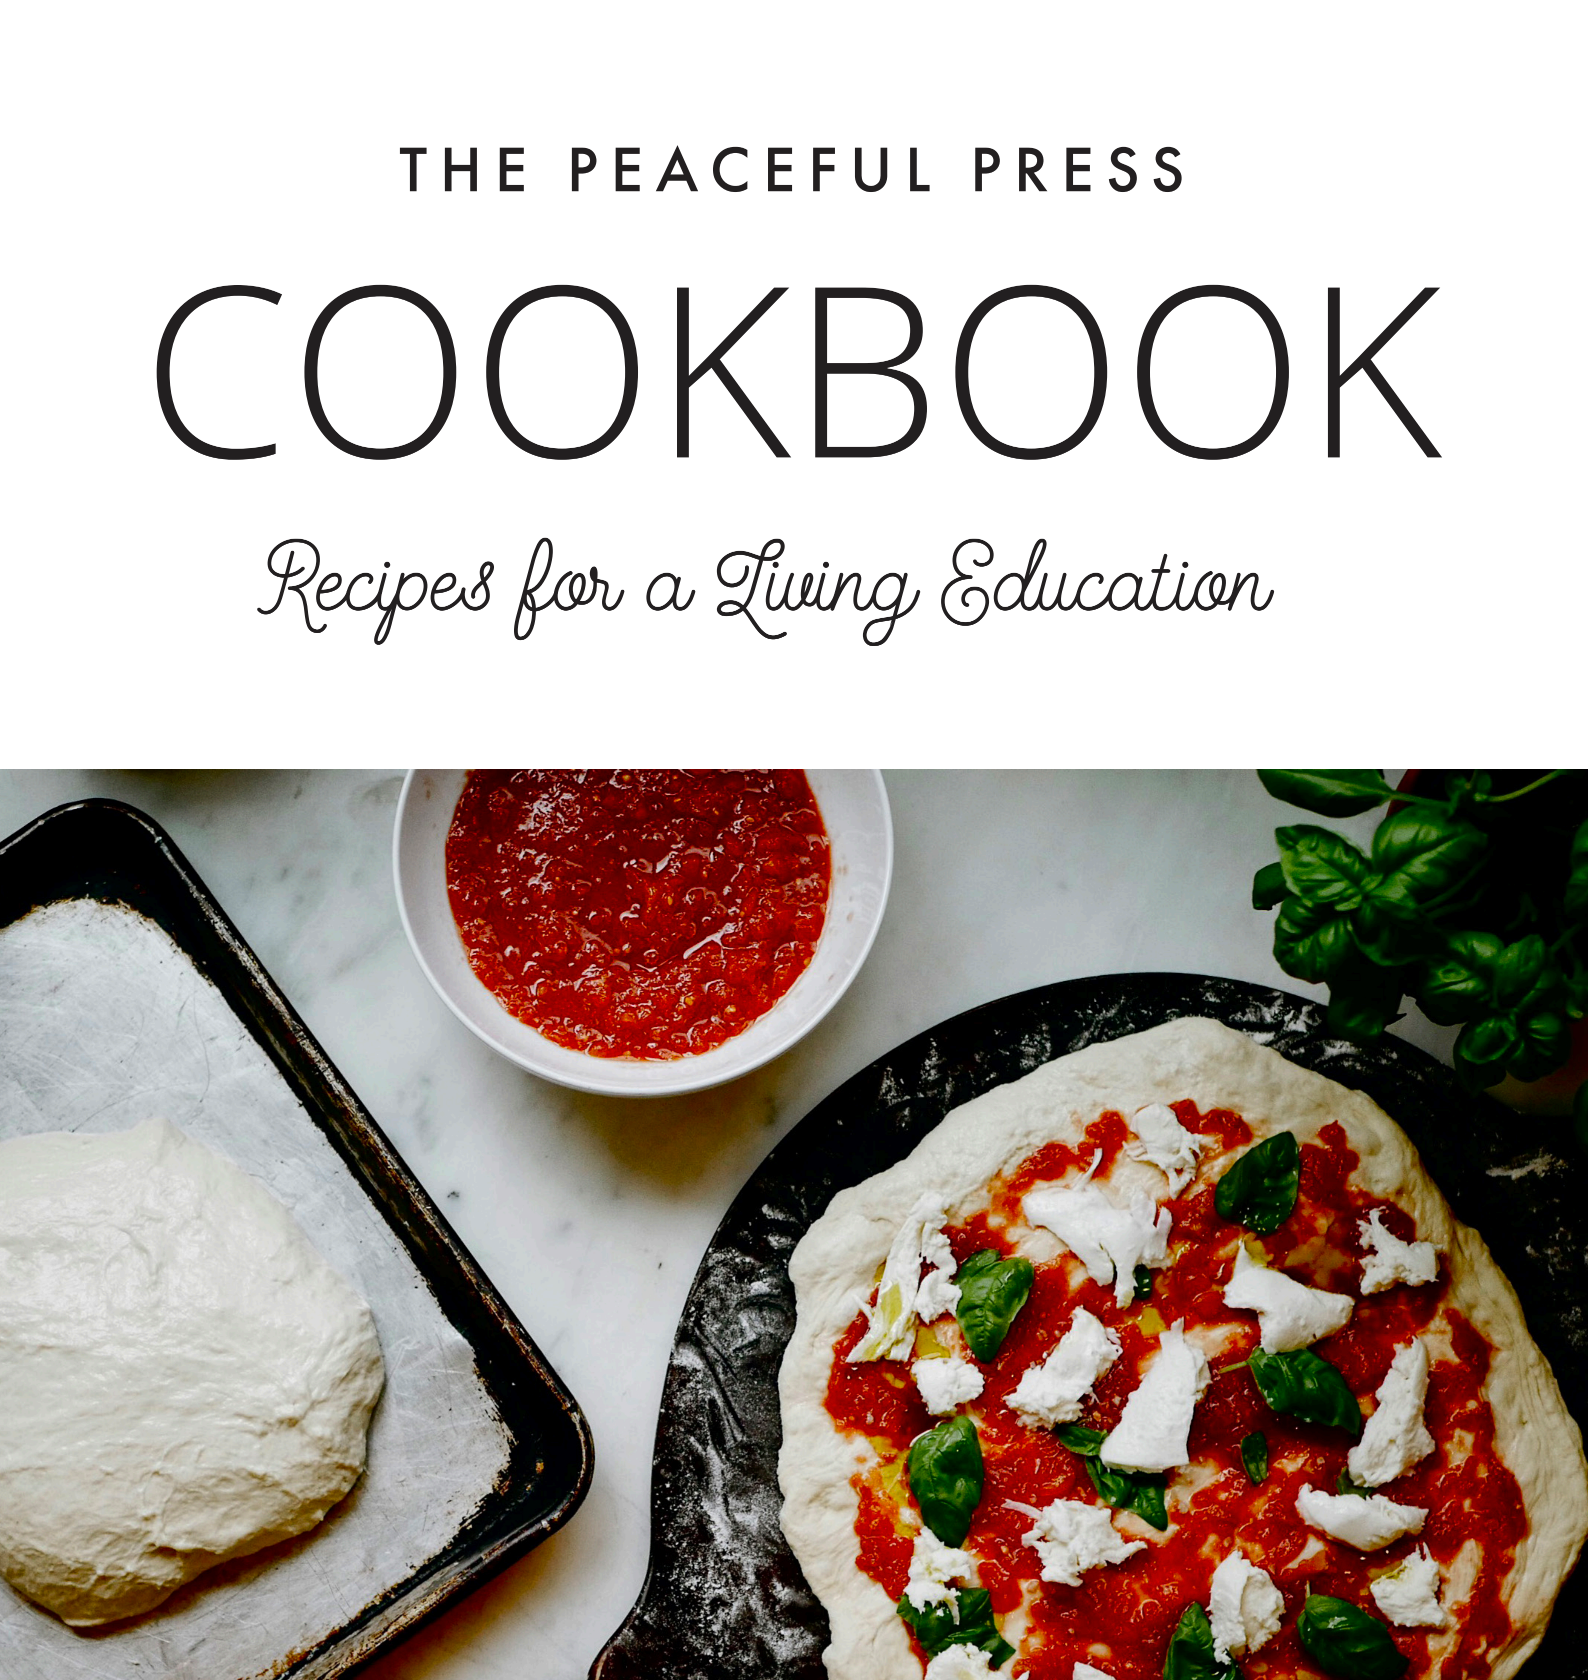 Cover art for the Peaceful Press Cook Book, "Recipes for a Living Education"